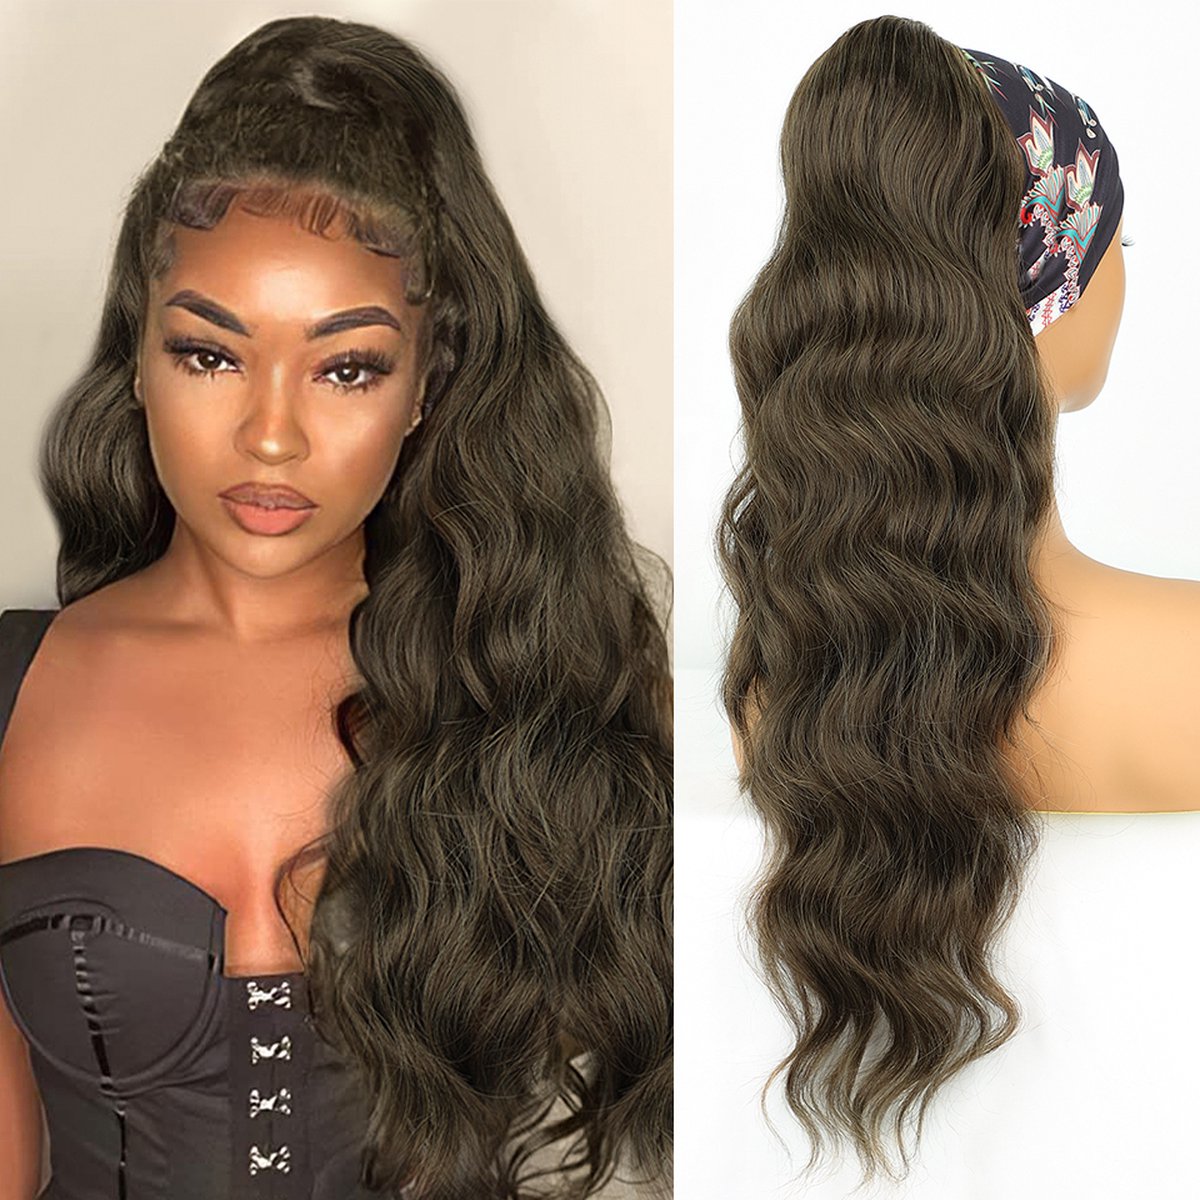 Miss Ponytails - Bodywave ponytail extentions - 24 inch - Bruin 8-29 - Hair extentions - Haarverlenging